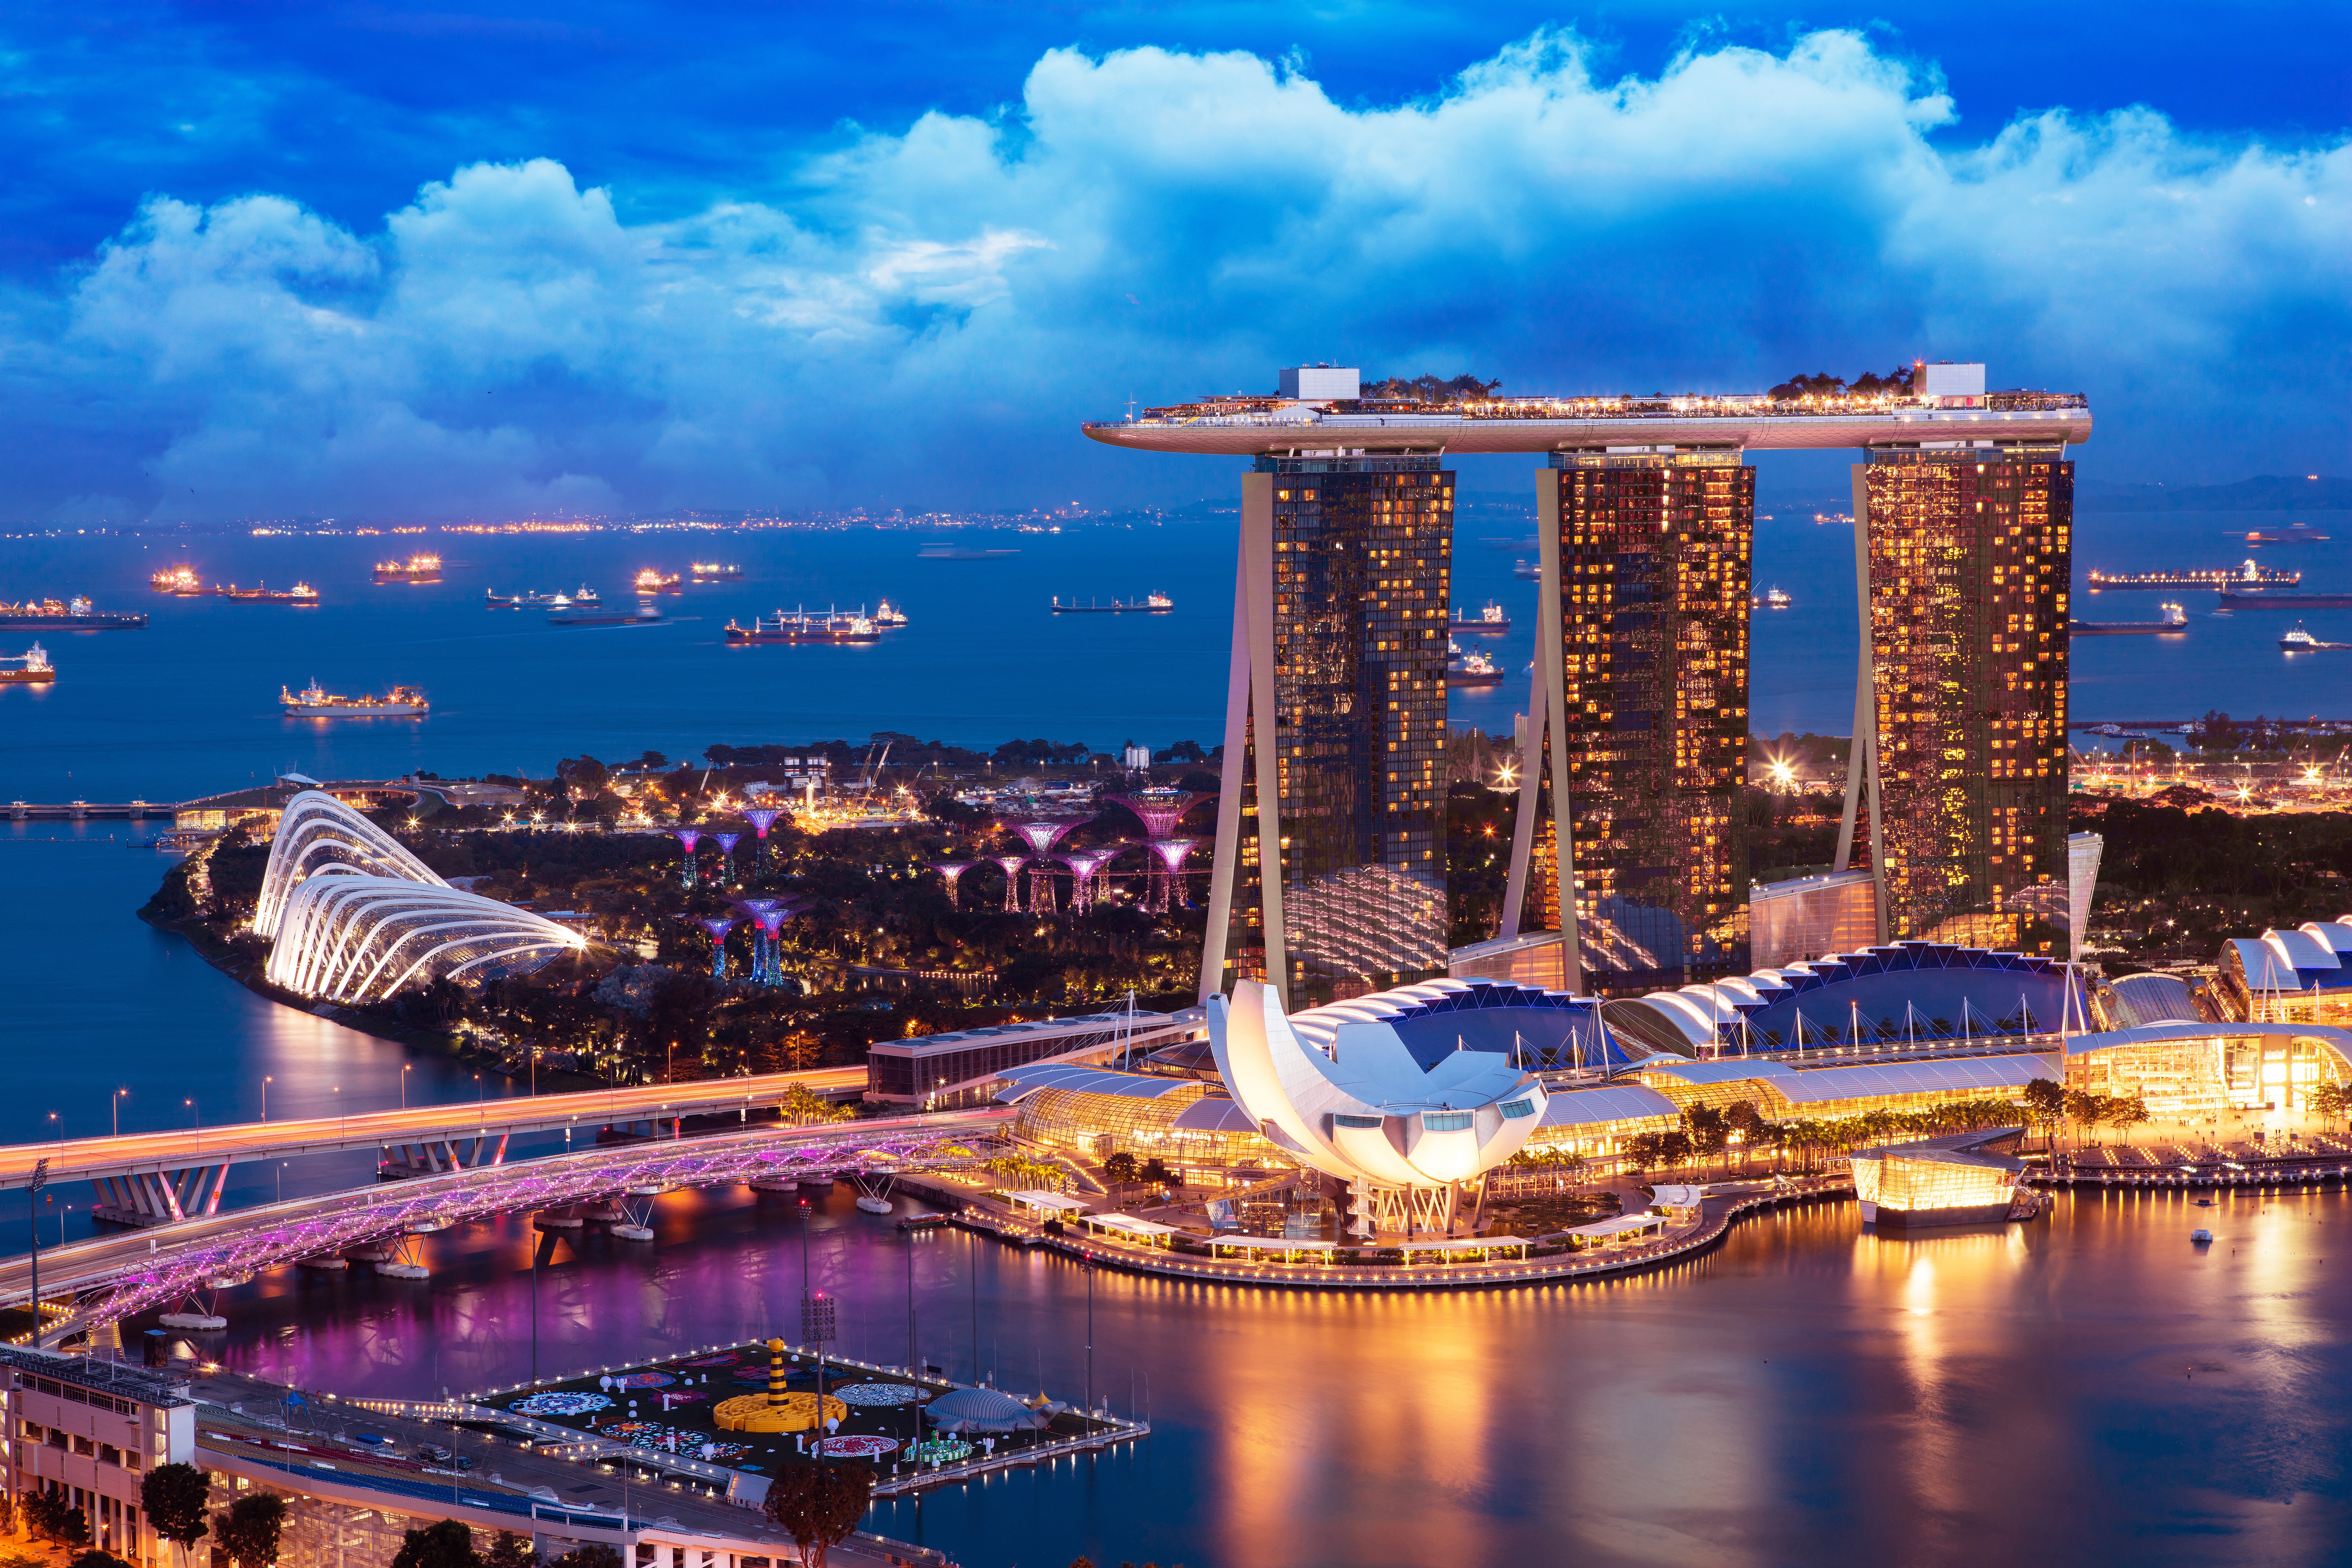 Singapore has seen success in building its ultra-wealthy population, yet getting them to invest locally is a bigger challenge. Image: Shutterstock